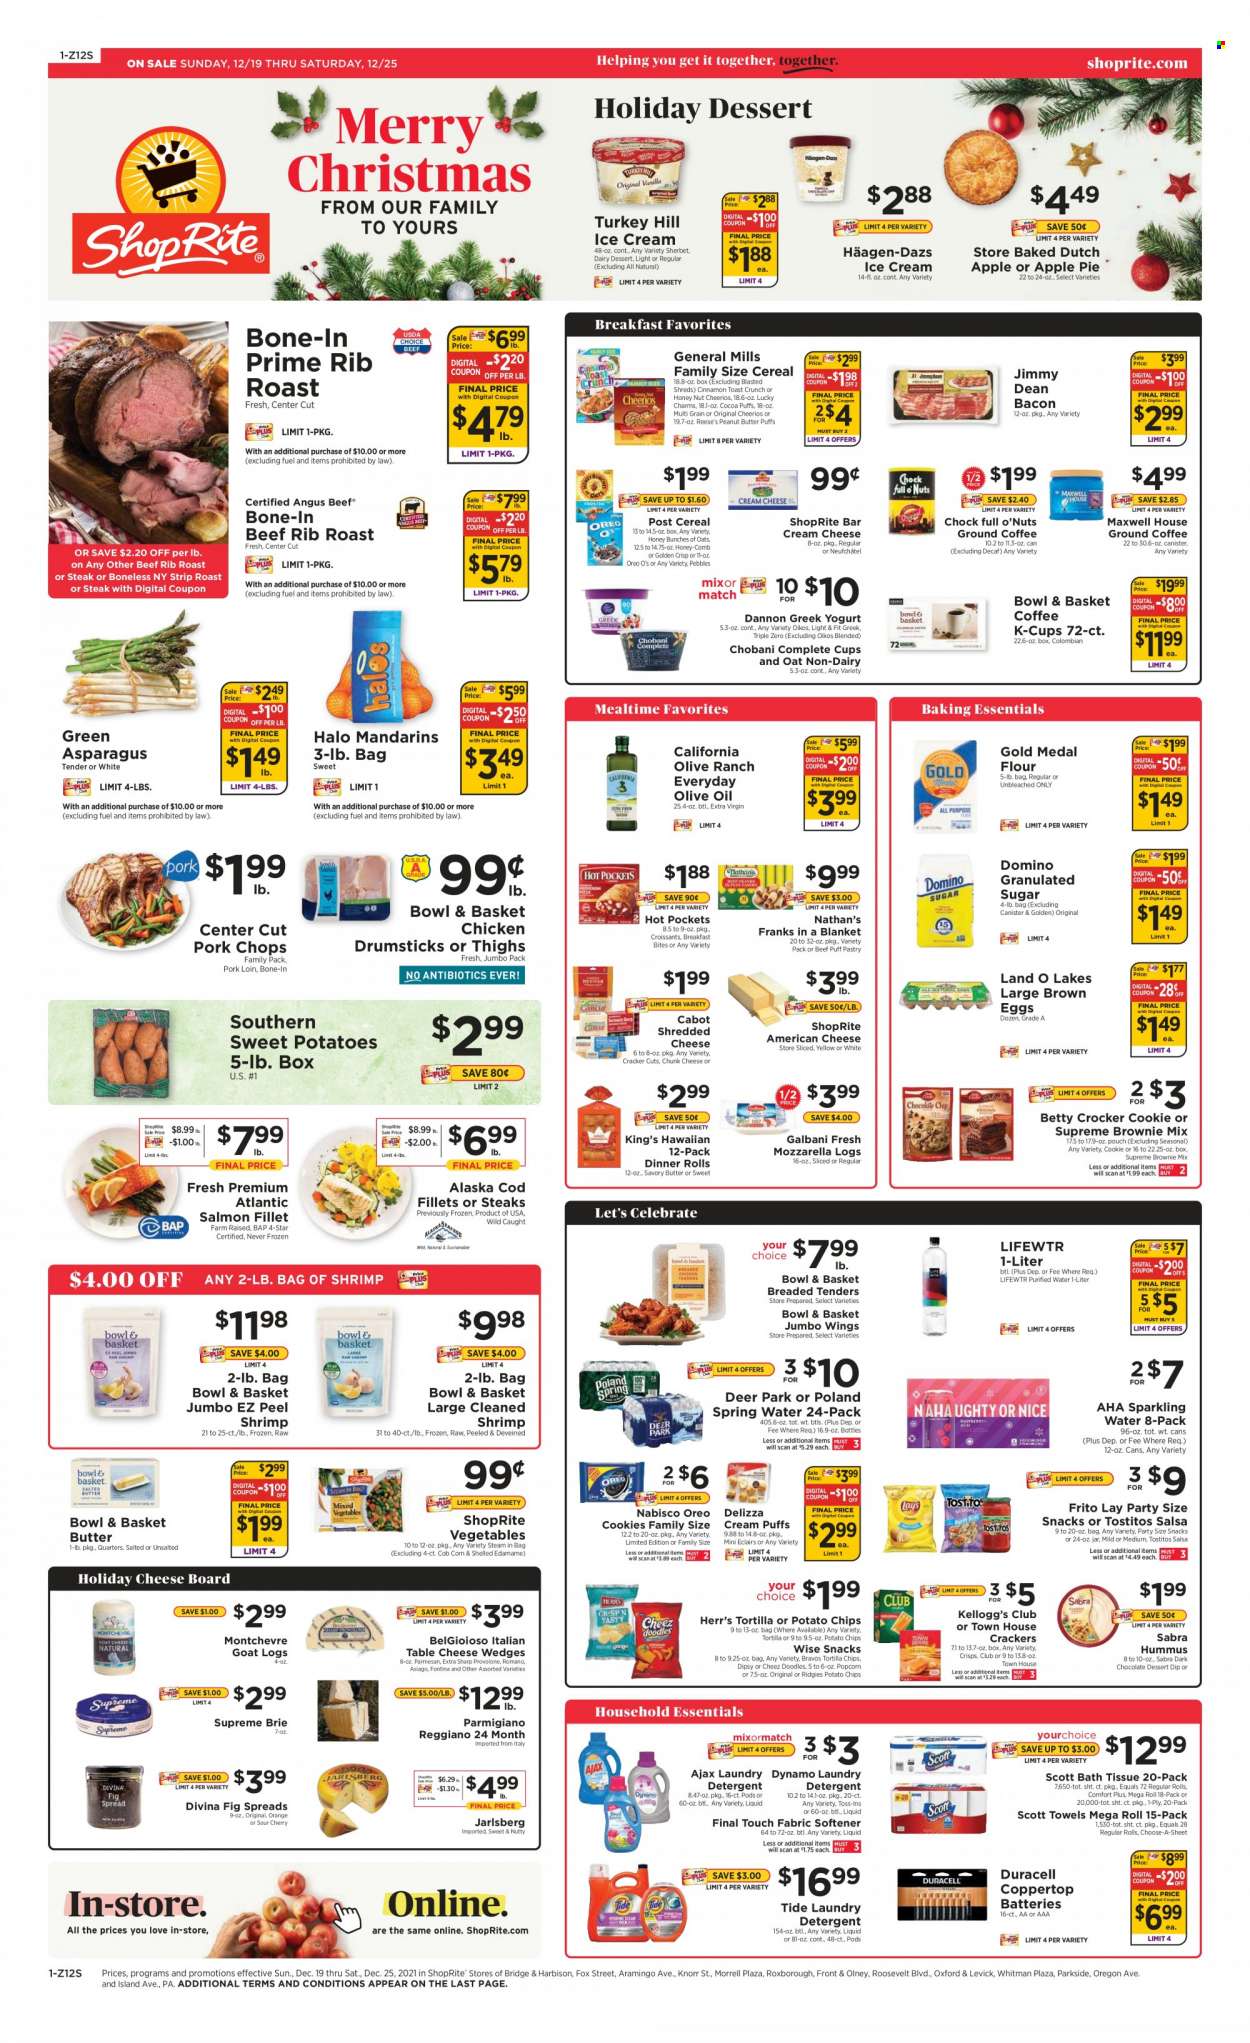 ShopRite Flyer - 12/19/2021 - 12/25/2021 - Sales products - pie, dinner rolls, Bowl & Basket, apple pie, brownie mix, asparagus, corn, Edamame, sweet potato, mandarines, orange, cod, salmon, salmon fillet, shrimps, hot pocket, Knorr, Jimmy Dean, bacon, hummus, american cheese, asiago, cream cheese, fontina, goat cheese, mozzarella, Neufchâtel, shredded cheese, parmesan, brie cheese, parmigiano reggiano, Galbani, Montchevre, chunk cheese, Provolone, greek yoghurt, Oreo, Oikos, Chobani, Dannon, eggs, dip, ice cream, sherbet, Reese's, Häagen-Dazs, cookies, snack, crackers, Kellogg's, dark chocolate, tortilla chips, potato chips, popcorn, Tostitos, cocoa, granulated sugar, sugar, cereals, Cheerios, cinnamon, salsa, extra virgin olive oil, olive oil, oil, peanut butter, nuts, spring water, sparkling water, Lifewtr, Maxwell House, coffee capsules, K-Cups, chicken drumsticks, chicken meat, beef meat, steak, pork chops, pork loin, pork meat, bath tissue, Scott, detergent, Ajax, Tide, fabric softener, laundry detergent, comb, cheese board, battery, Duracell, essentials. Page 1.